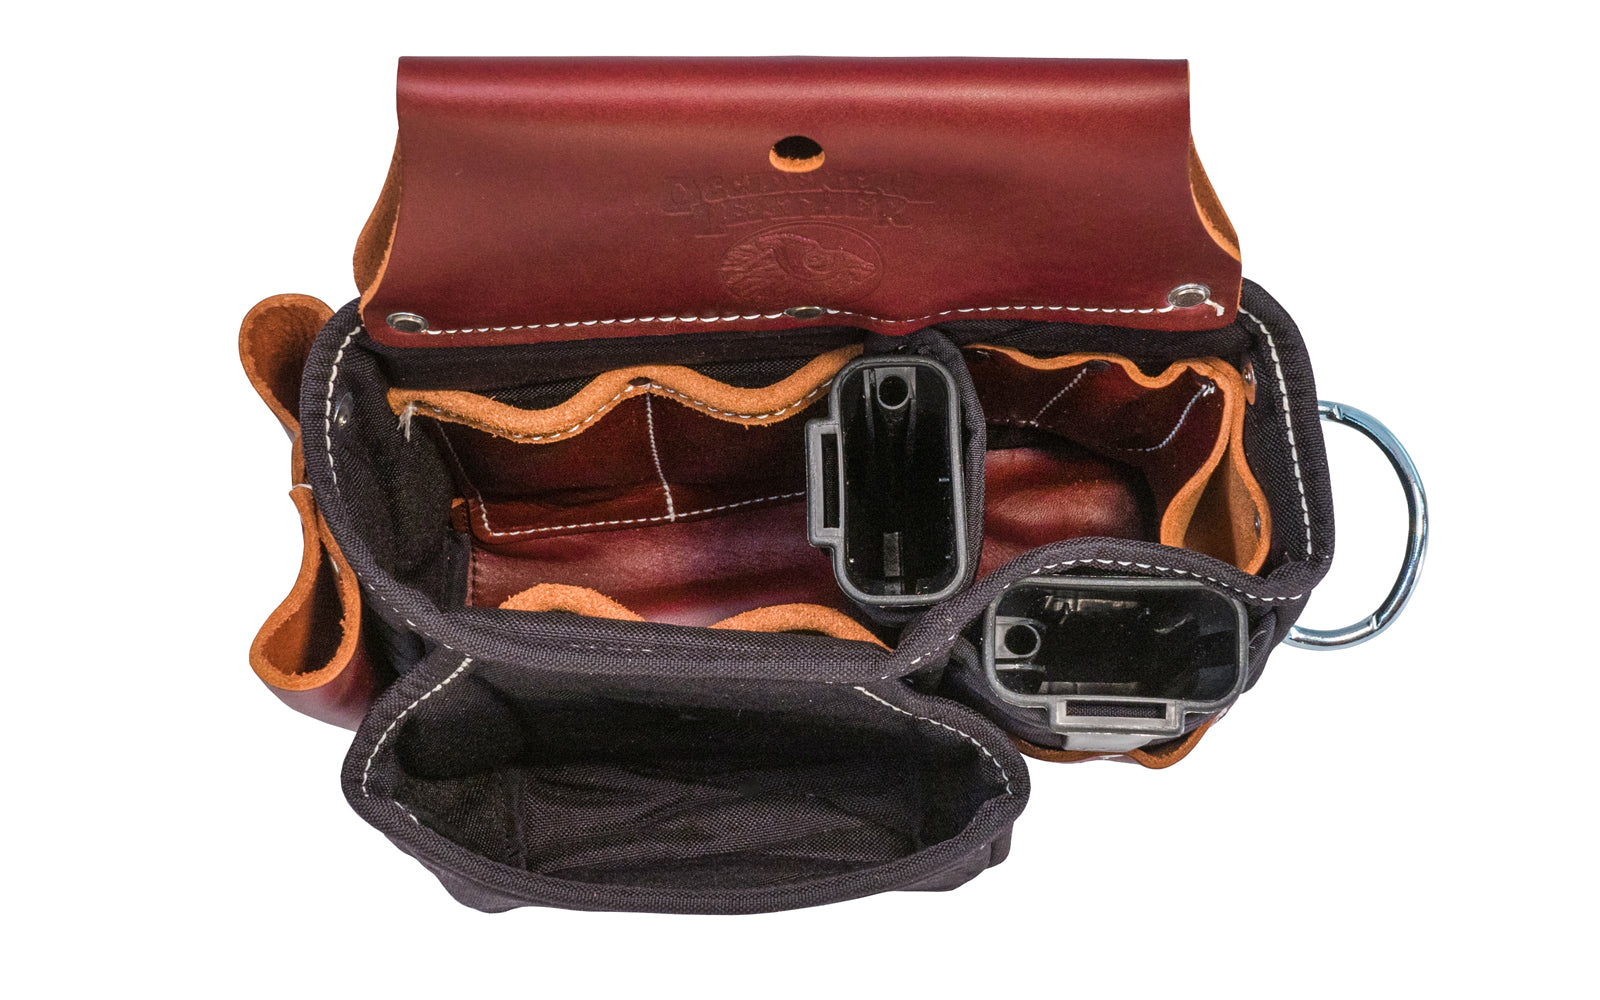 Occidental Leather "Stronghold" Tool Case ~ Model 9085 - Fits a 3" work belt - A case designed for tool organization! Two No. 2003 "Oxy Tool Shields", 18 pockets & tool holders total. Leather lined inside all along the bottom. Great for master finish carpenter or plant engineers. Made of Nylon & genuine Leather.